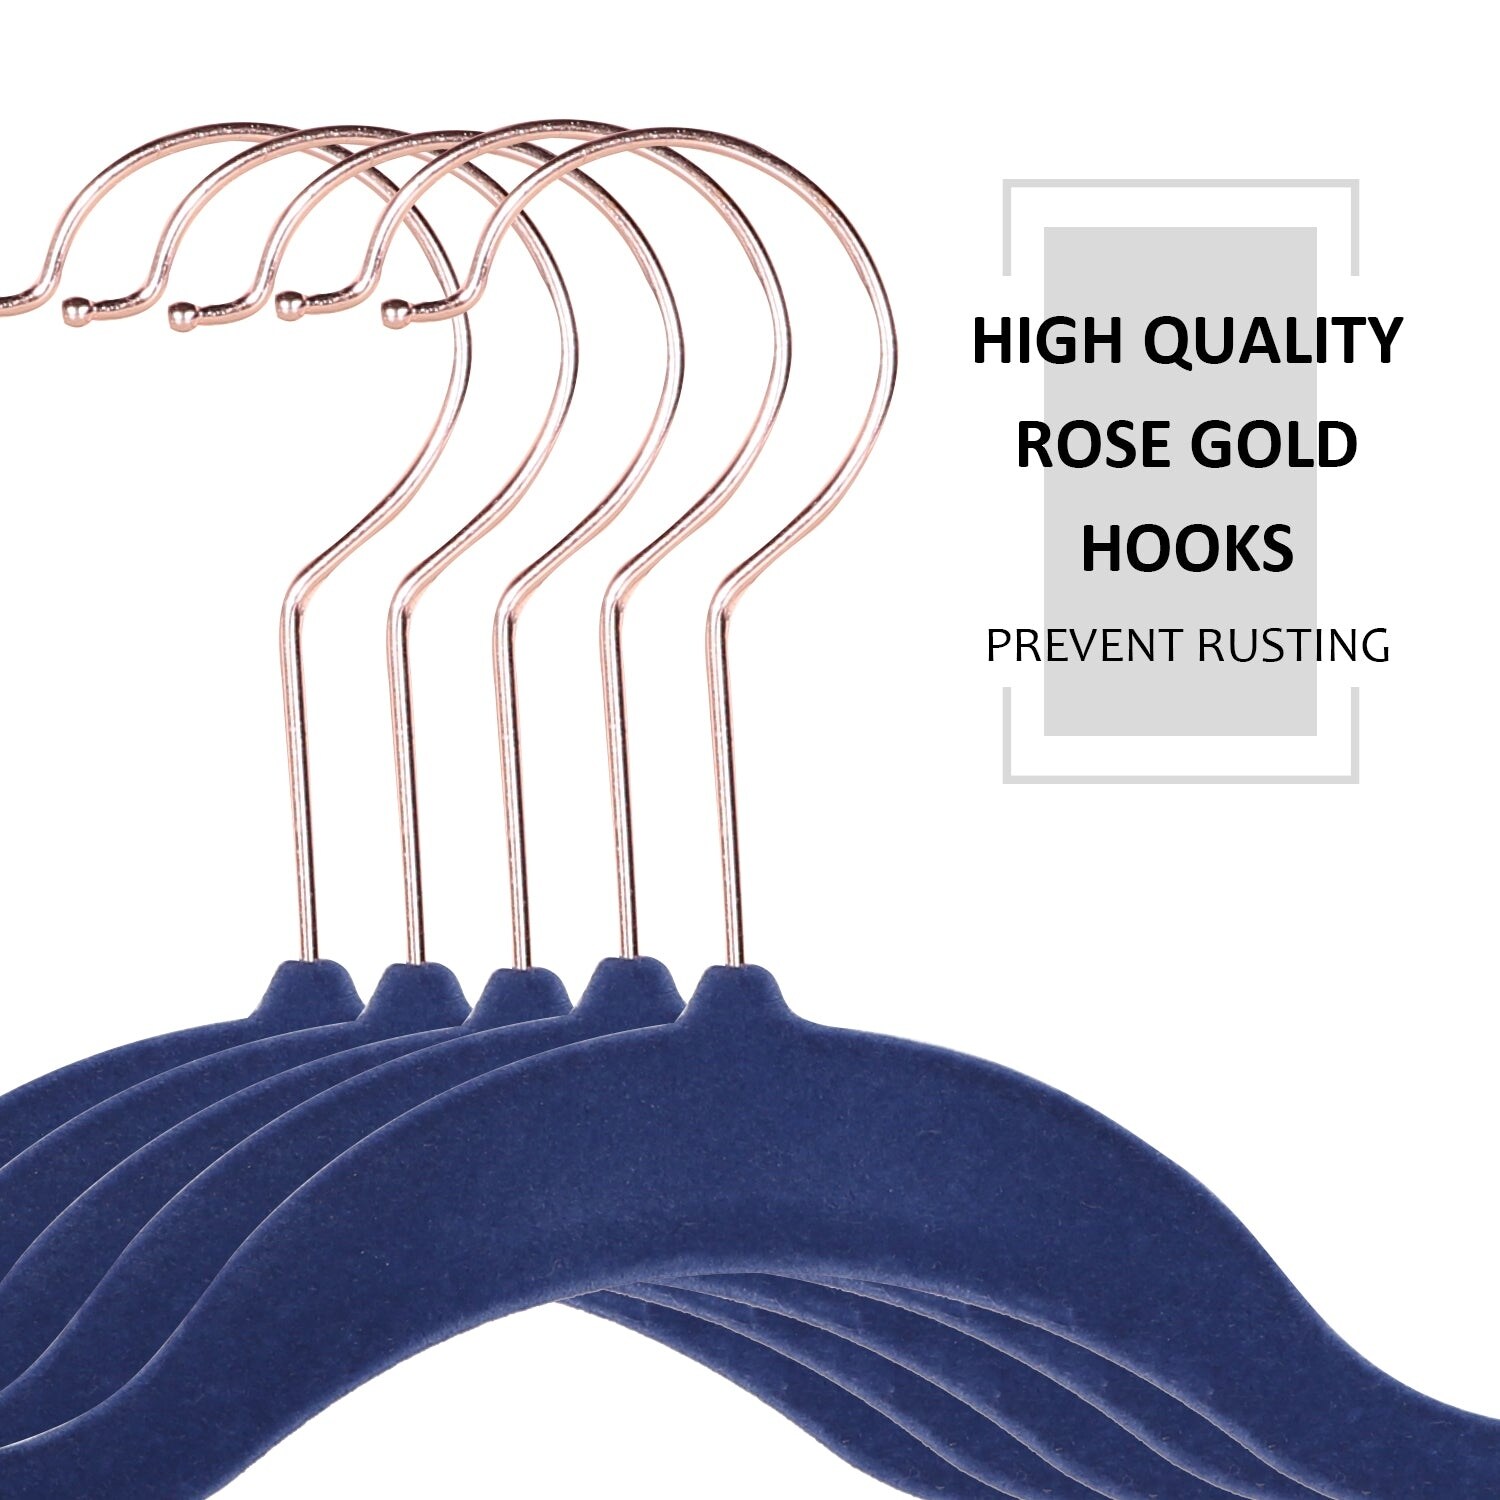 https://ak1.ostkcdn.com/images/products/is/images/direct/5e8b8a28b942af0ab8c13163e7a0e4c934edceb4/Hanger-Sets-Heavy-Duty-Velvet-Hangers-50-Pack-Non-Slip-%26Ultra-Thin%2C-Six-Colors-Option.jpg